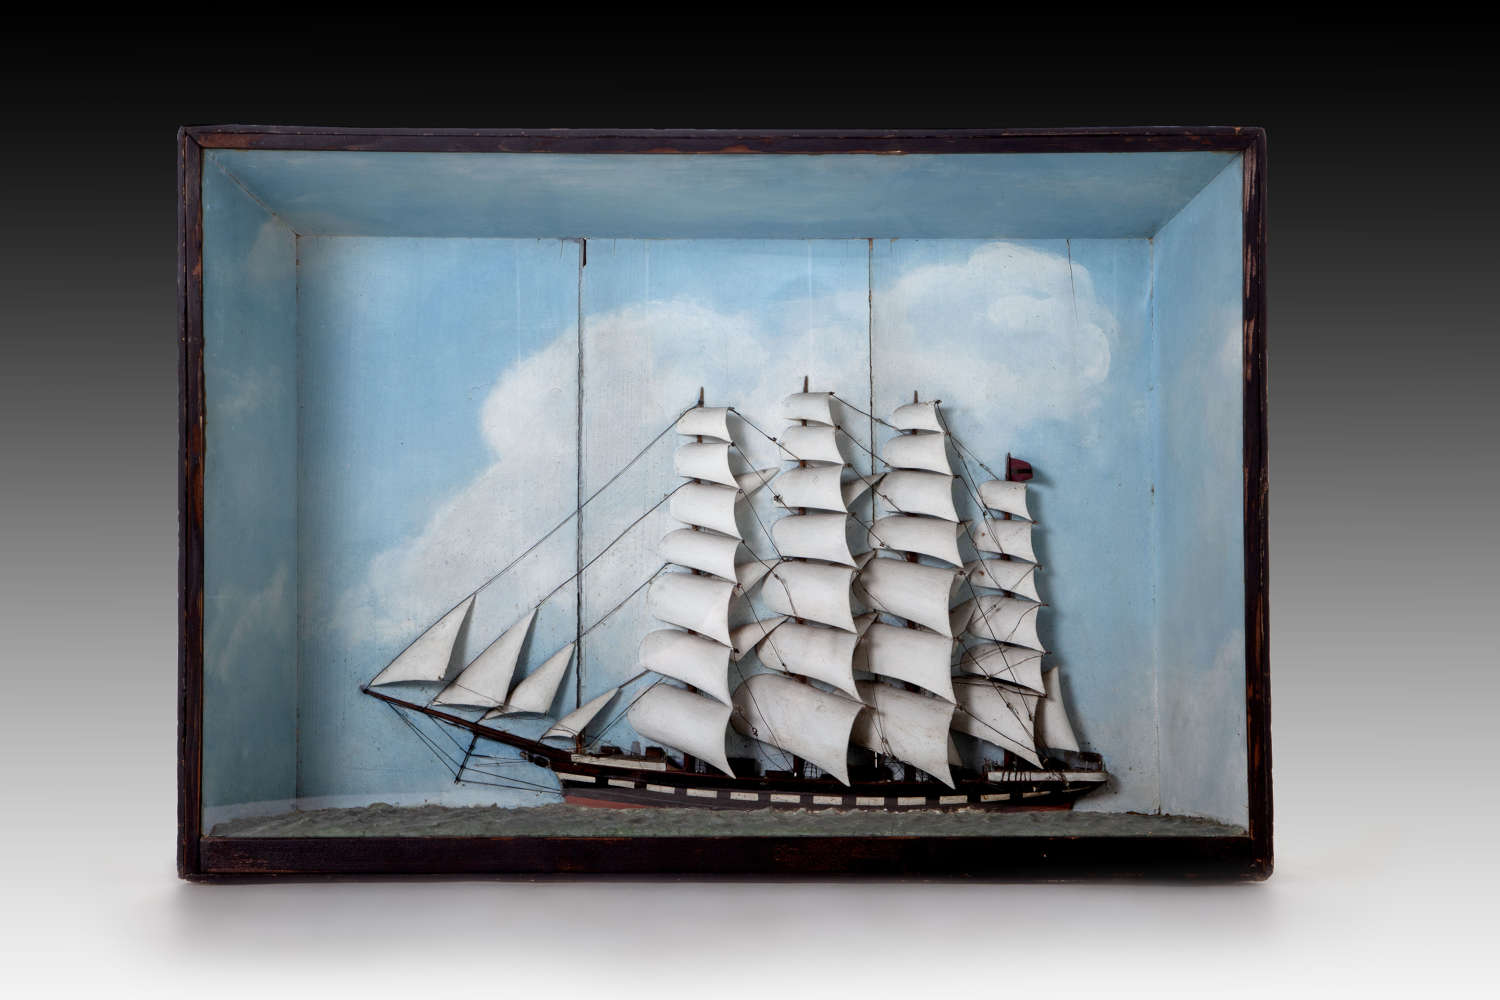 A very large diorama of a ship in full sail on a bright day